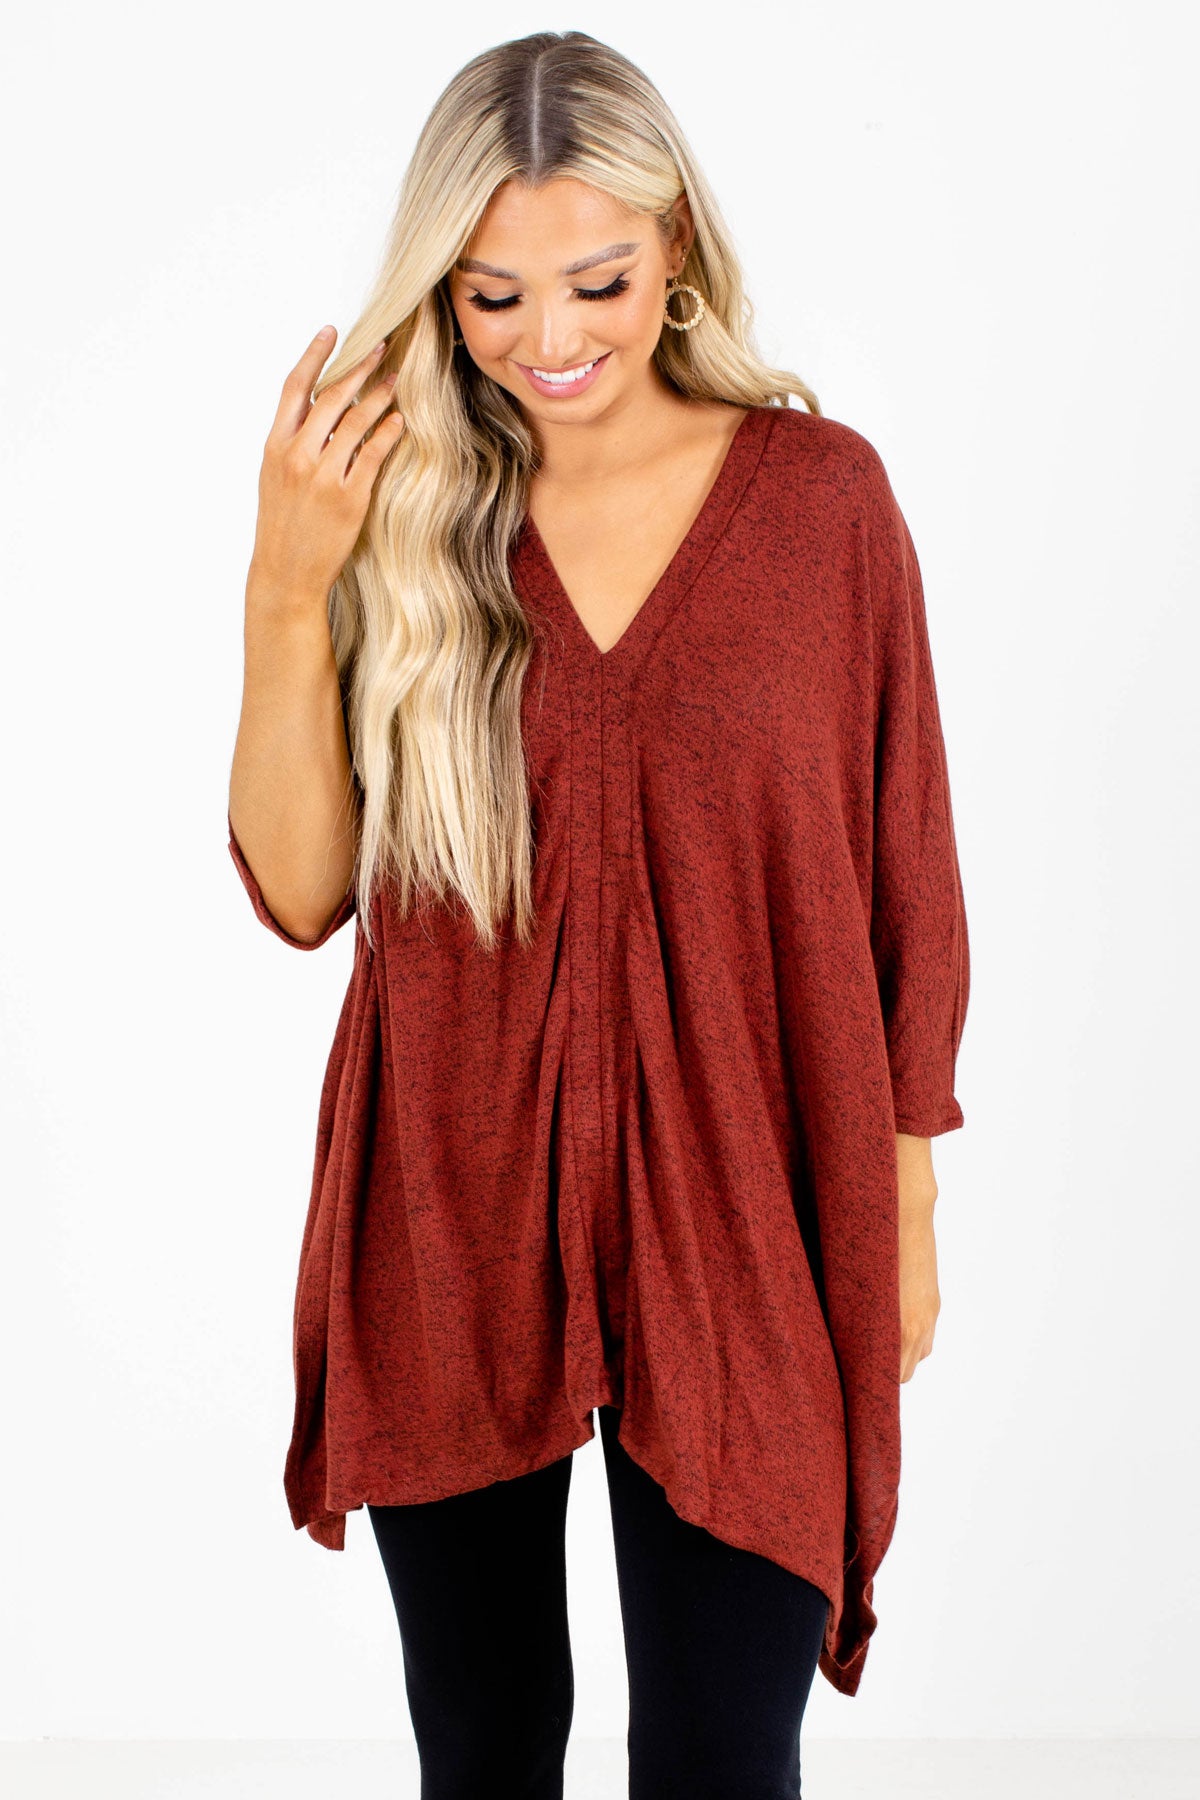 Rust Red V Neck Poncho Top For Women